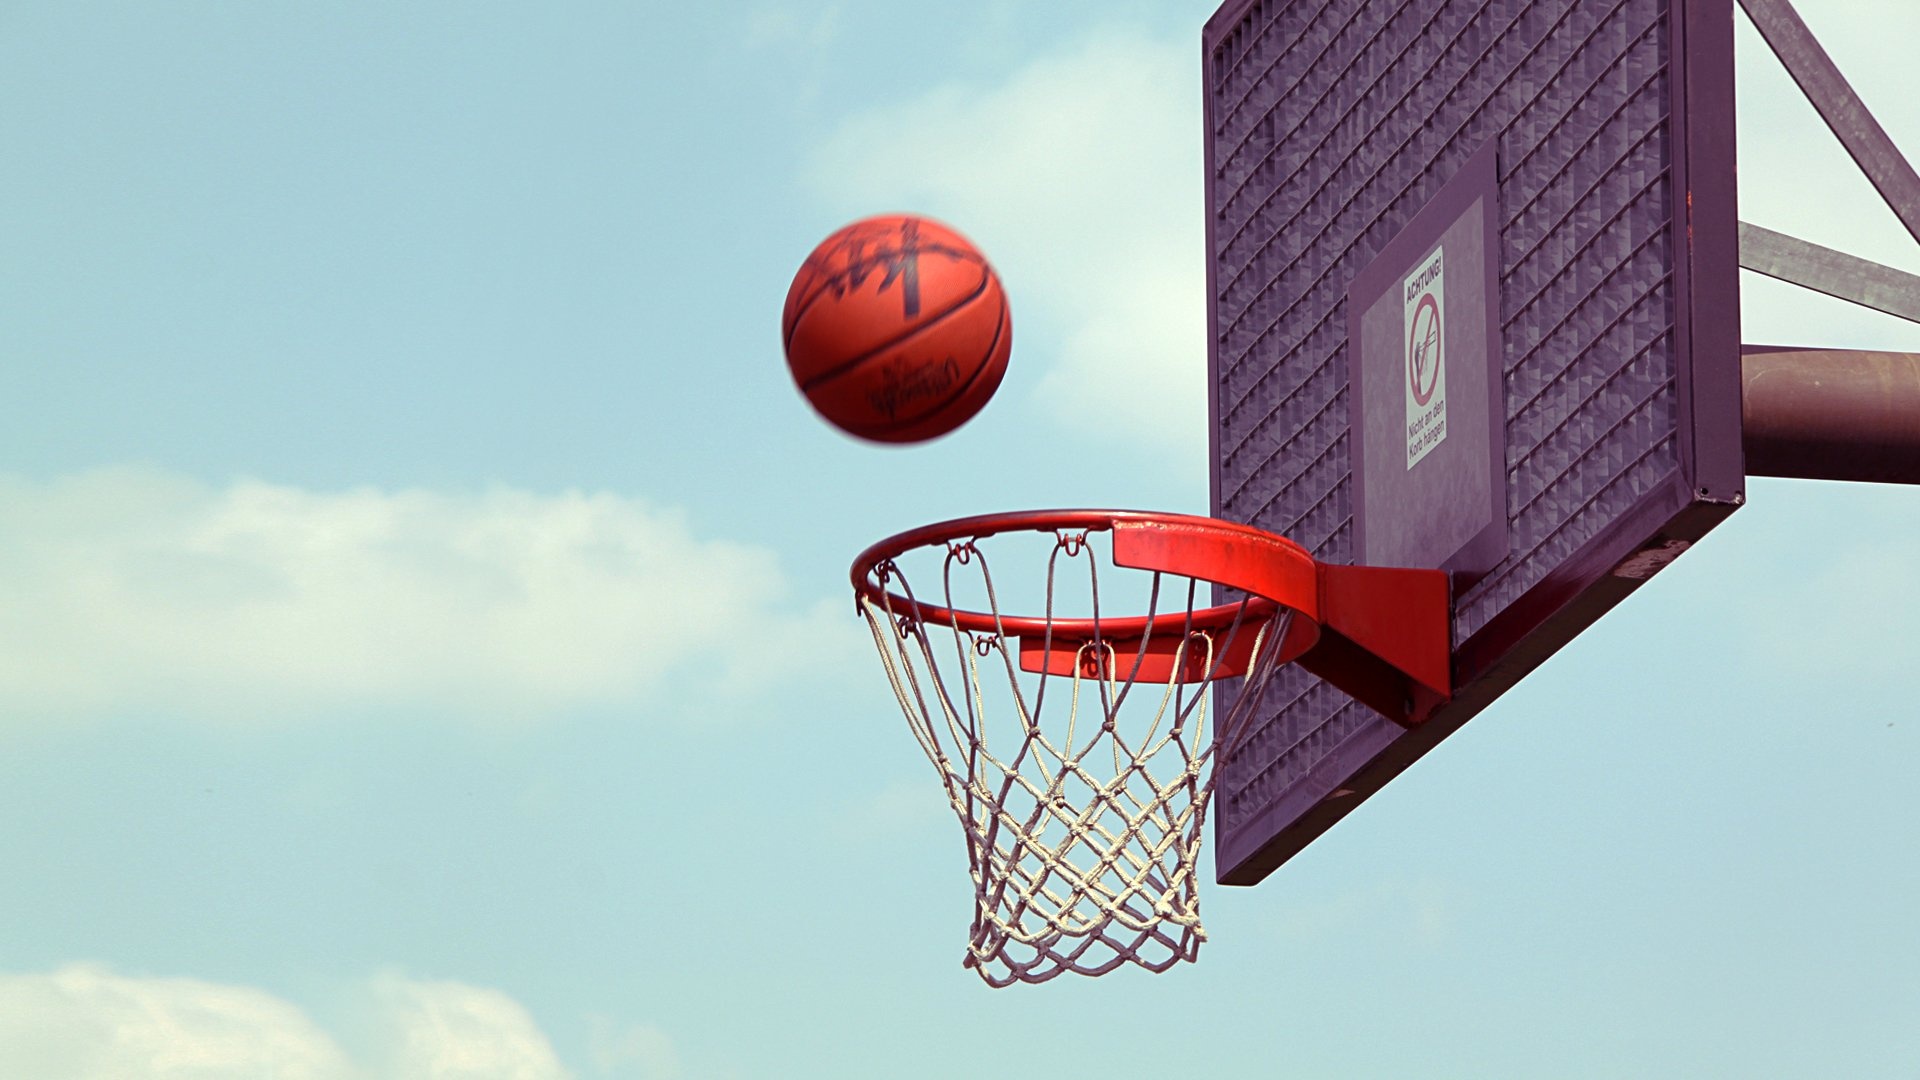 Streetball: Basketball basket and a ball, Urban sports played on asphalt. 1920x1080 Full HD Background.